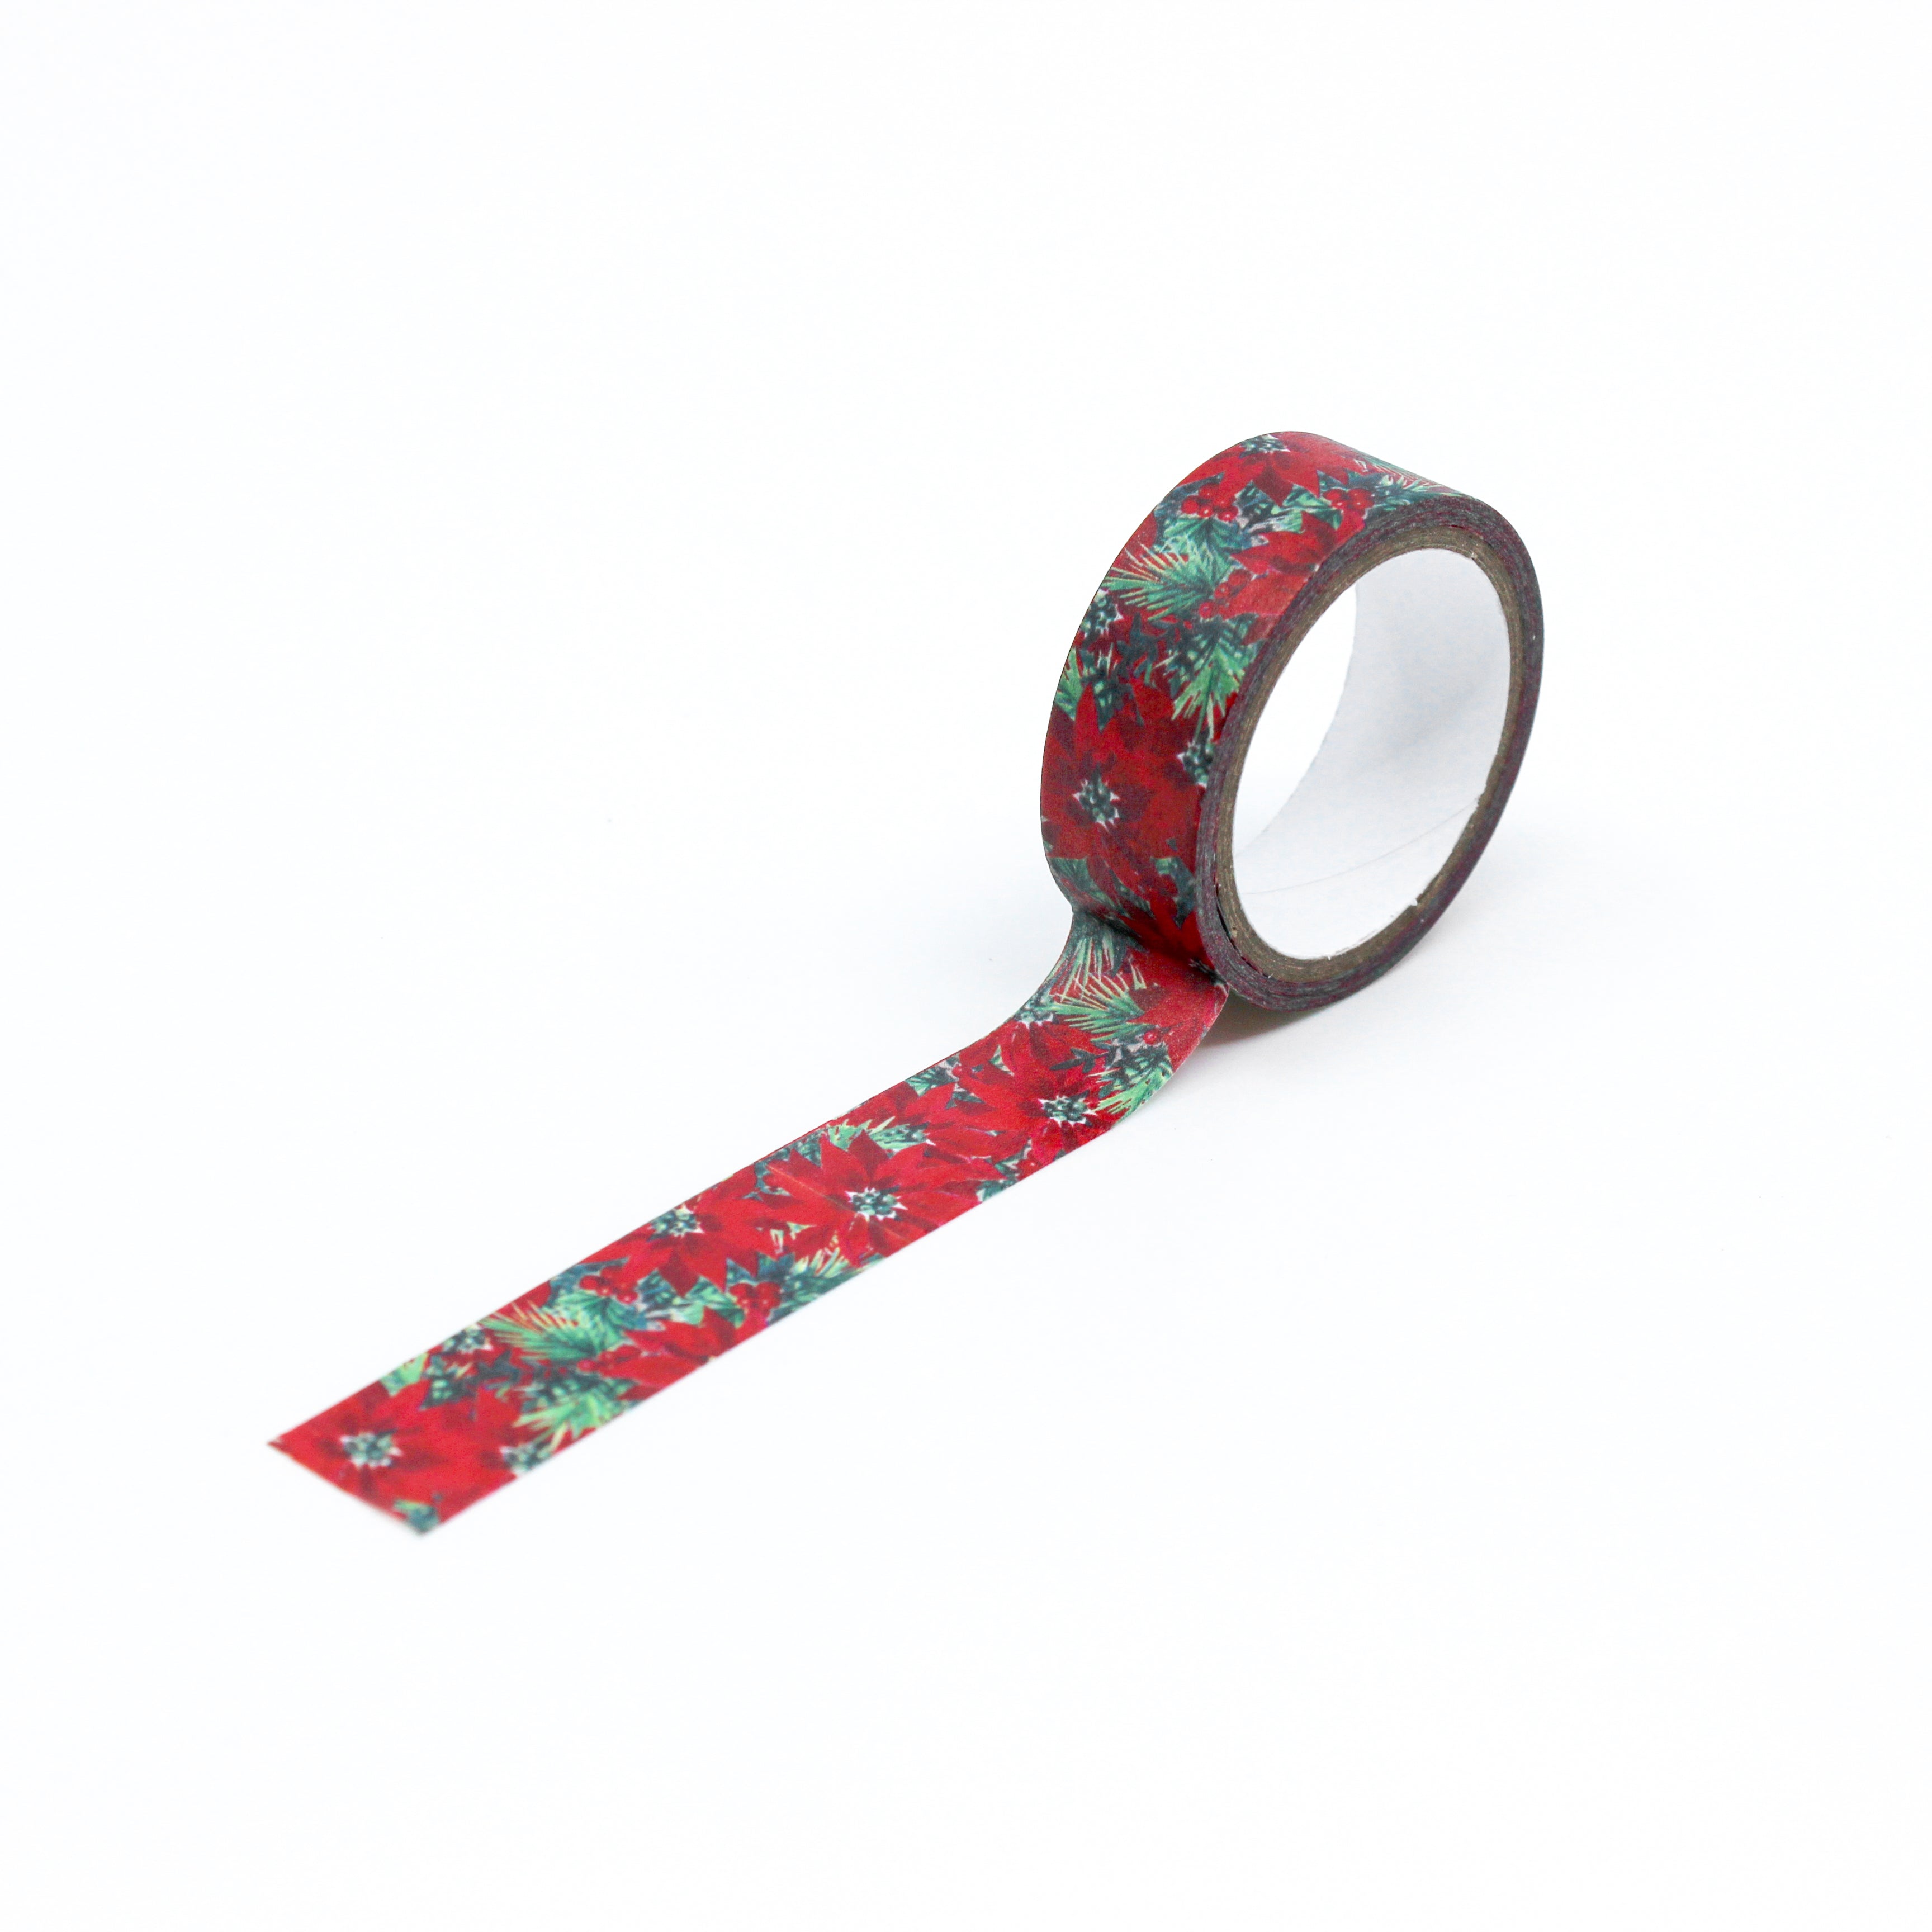 Celebrate the holidays with our poinsettia-themed washi tape, ideal for adding a classic and festive touch to your crafts, embodying the joy and tradition of holiday blooms. This tape is sold at BBB Supplies Craft Shop.